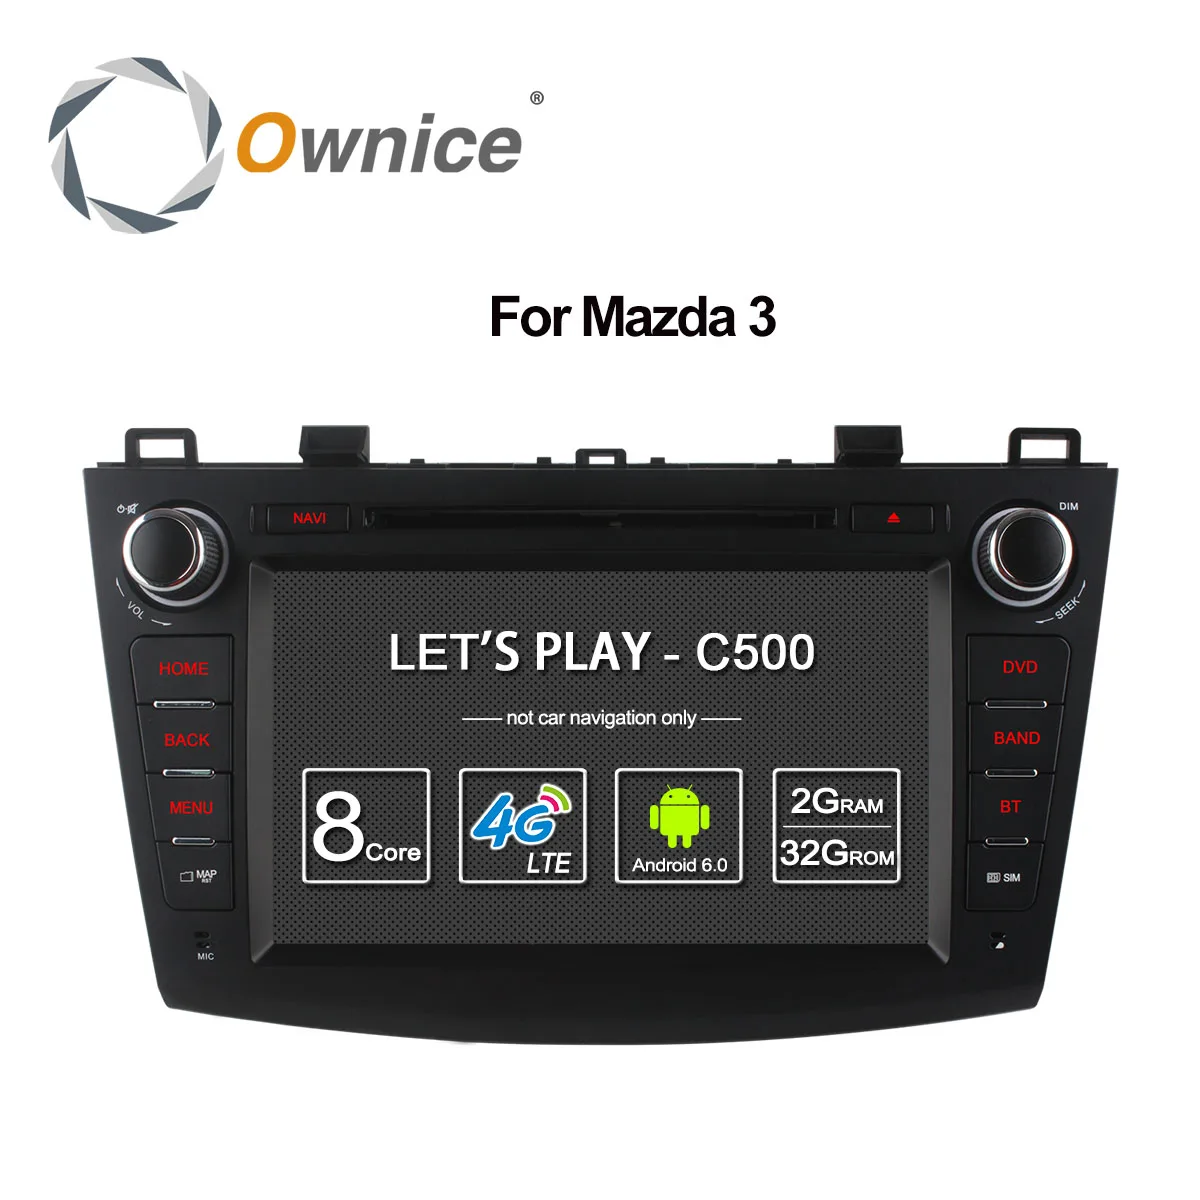 

Ownice C500 Octa 8 Core Android 6.0 Car DVD player For Mazda 3 2008-2013 WIFI Radio GPS Navi OBD DVR 2GB RAM 32GB ROM Support 4G